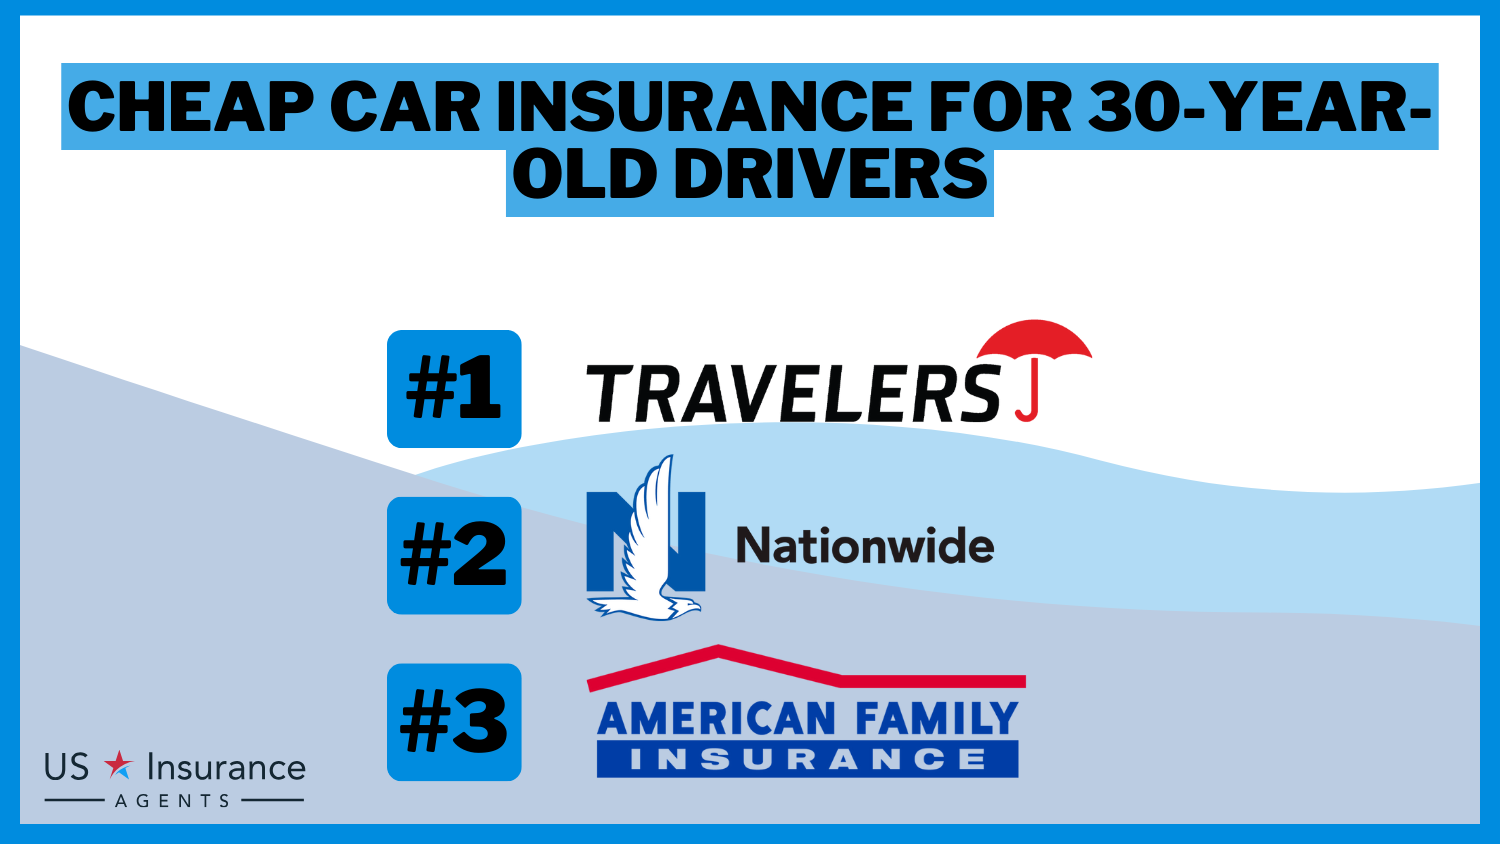 Cheap Car Insurance for 30-Year-Old Drivers: Travelers, Nationwide, and American Family